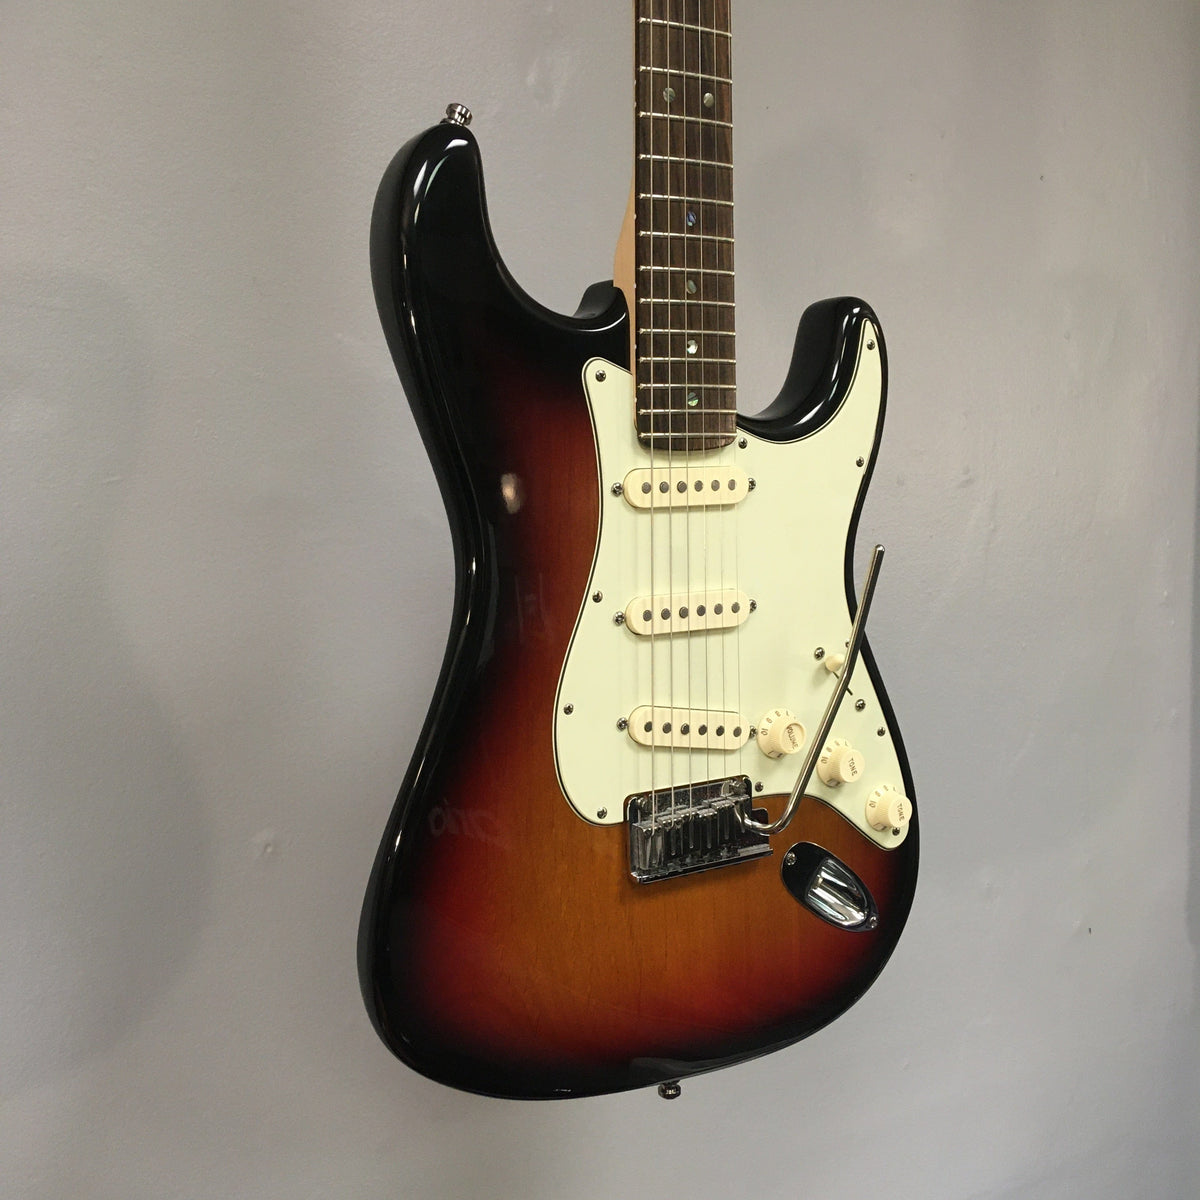 Fender Deluxe Stratocaster USA Used